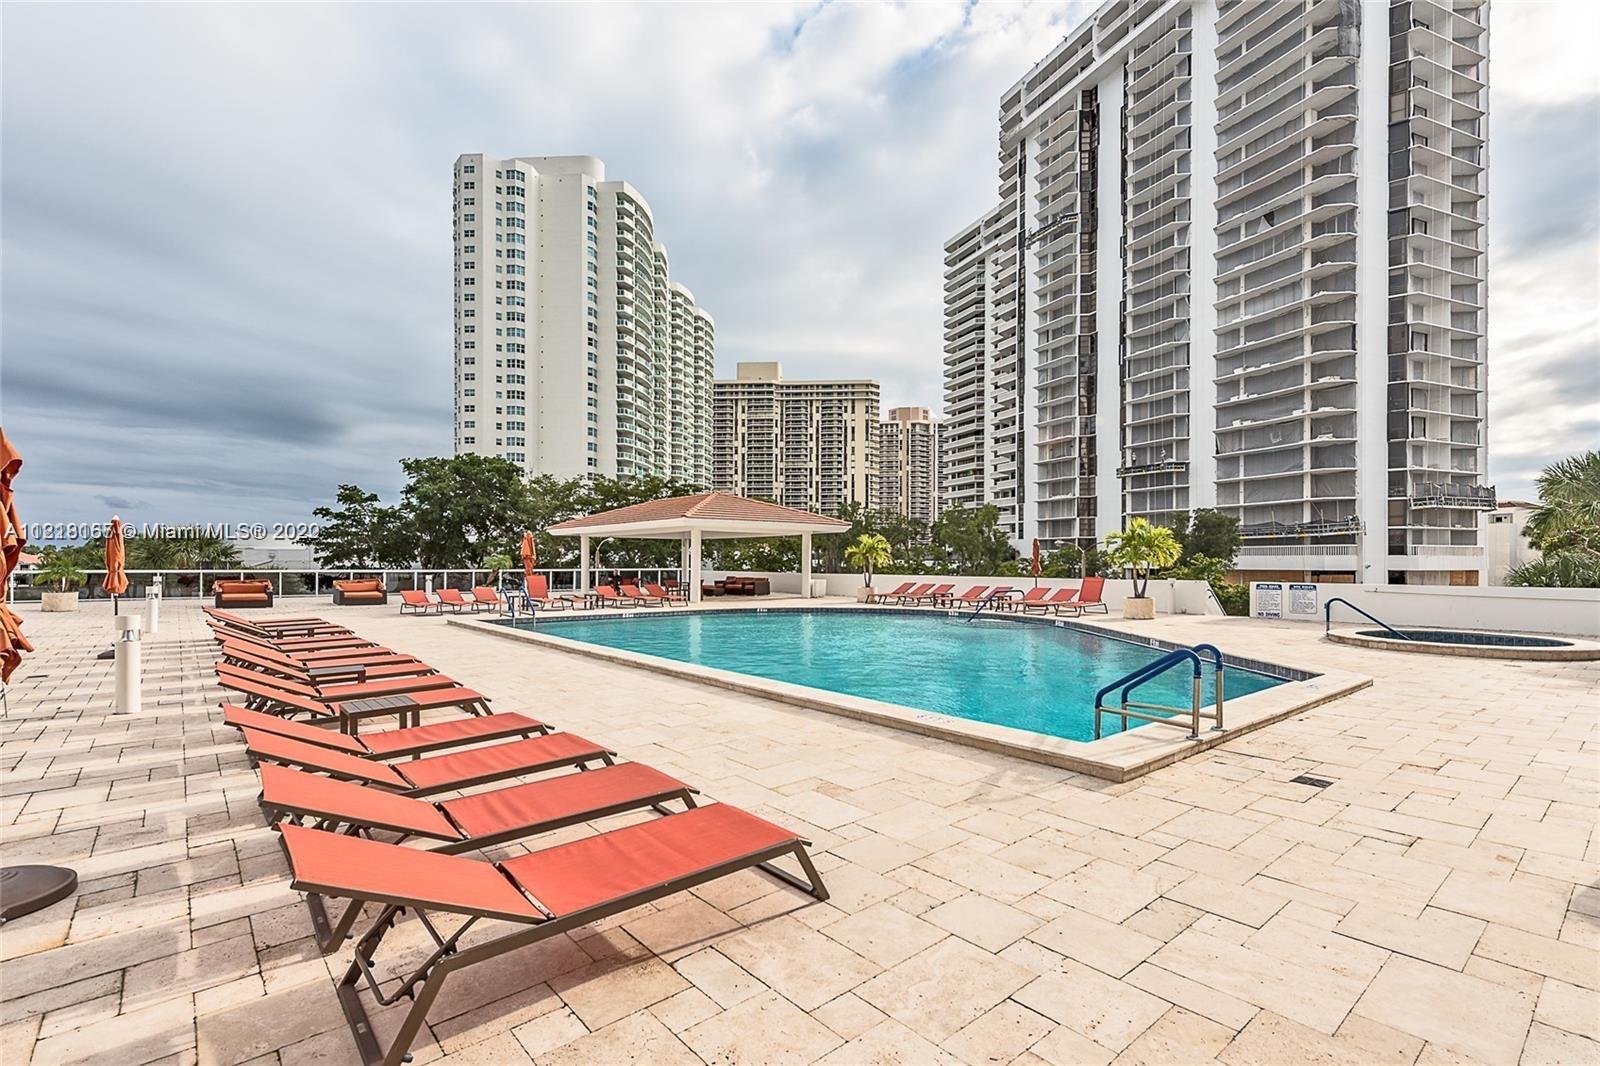 BEAUTIFUL 2 bd, 2 baths apartment located in the heart of AVENTURA***Unit has a great split floor pl